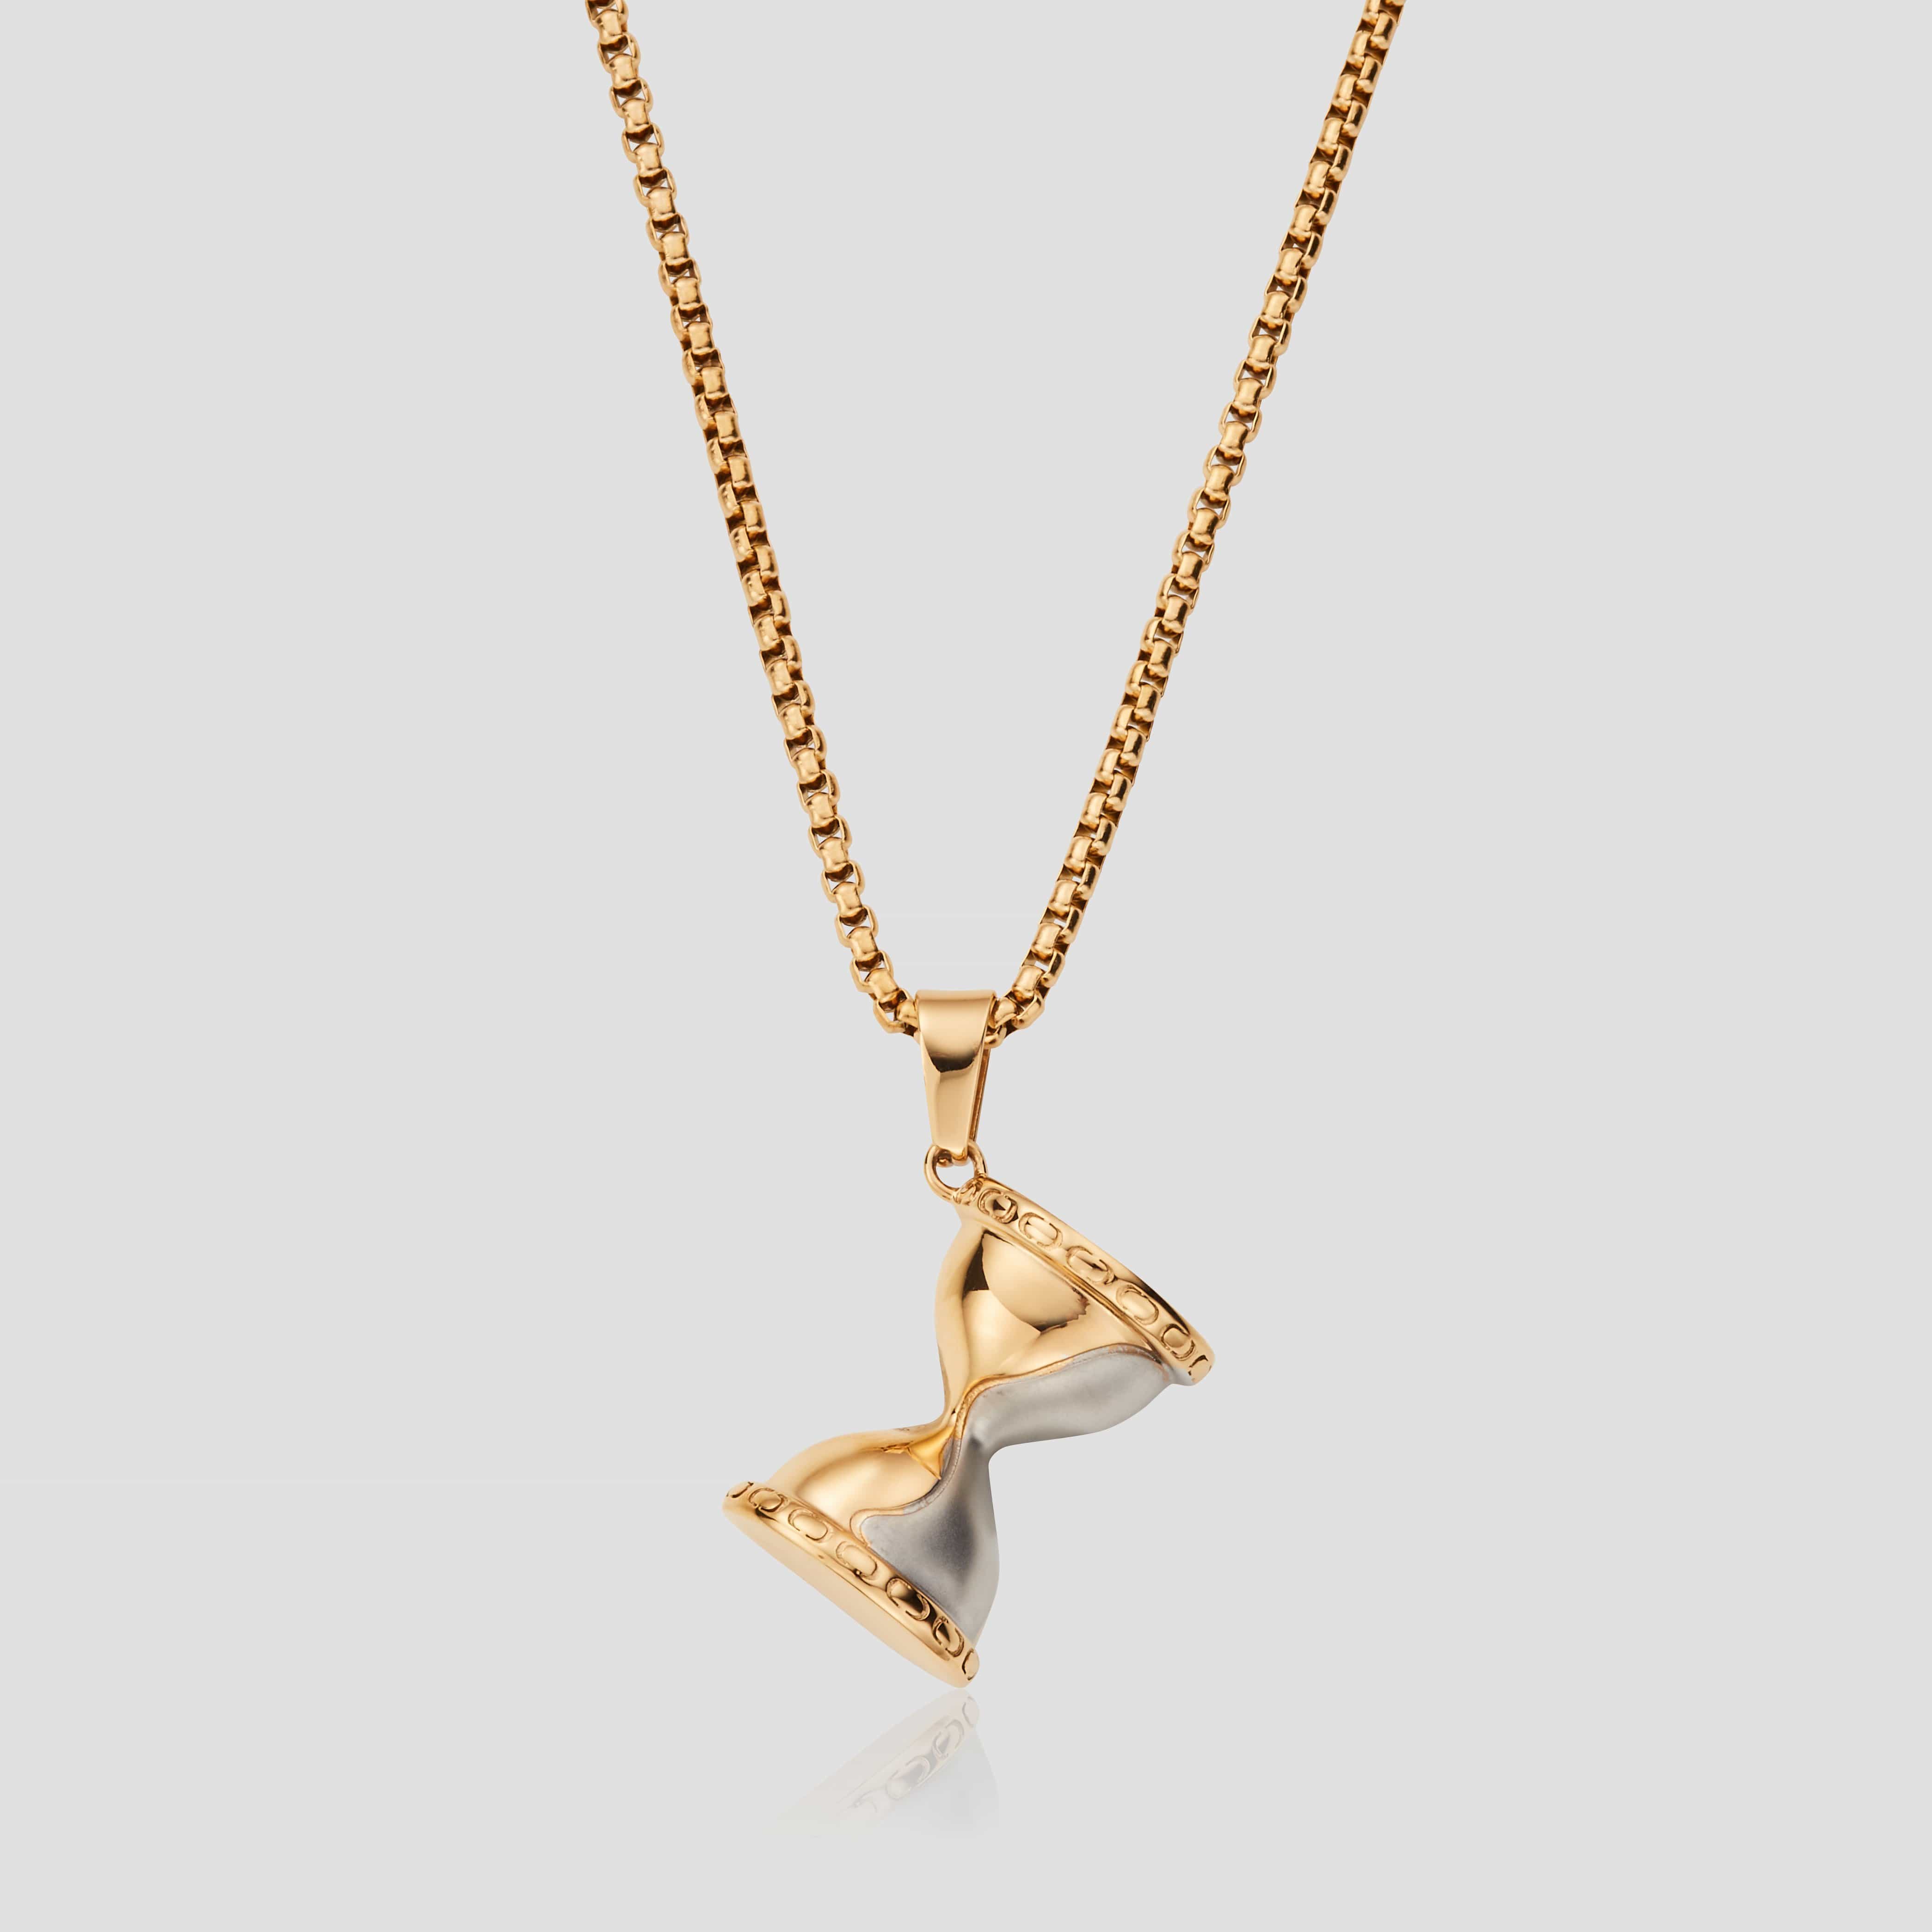 Gold Hourglass Pendant Necklace